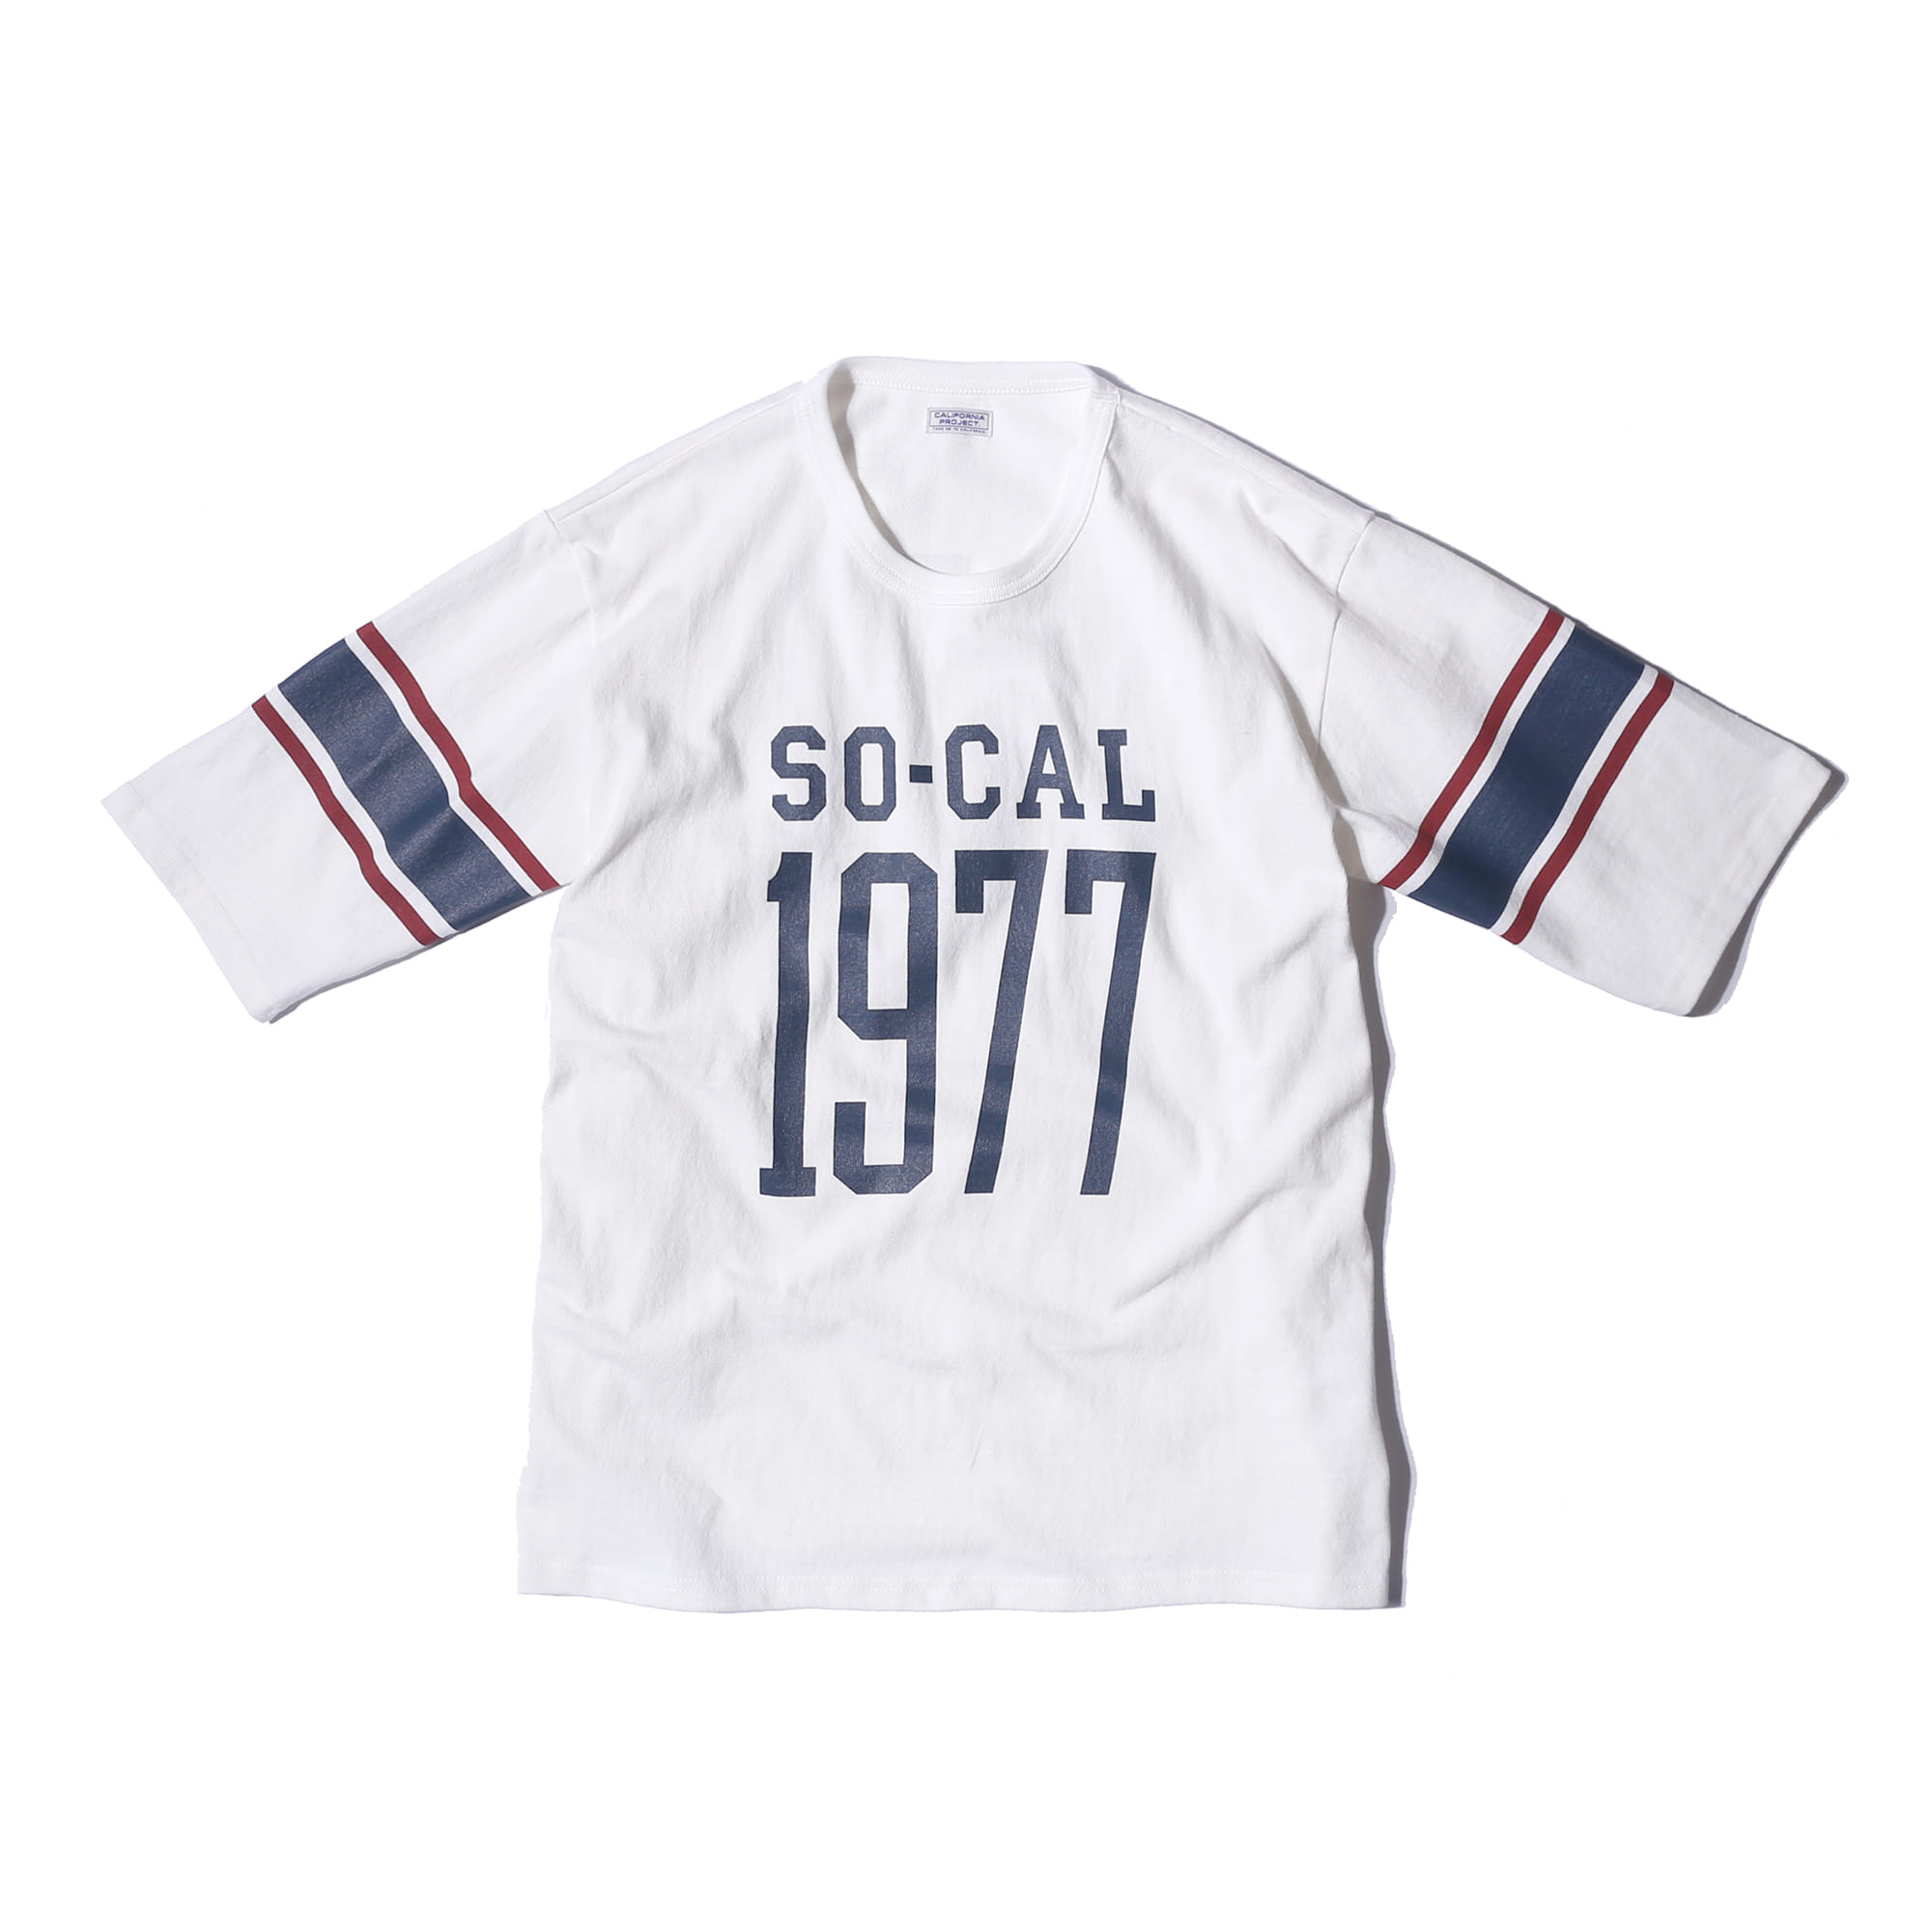 So-cal 1977&#039; Football T-shirts &quot;WHITE&quot;